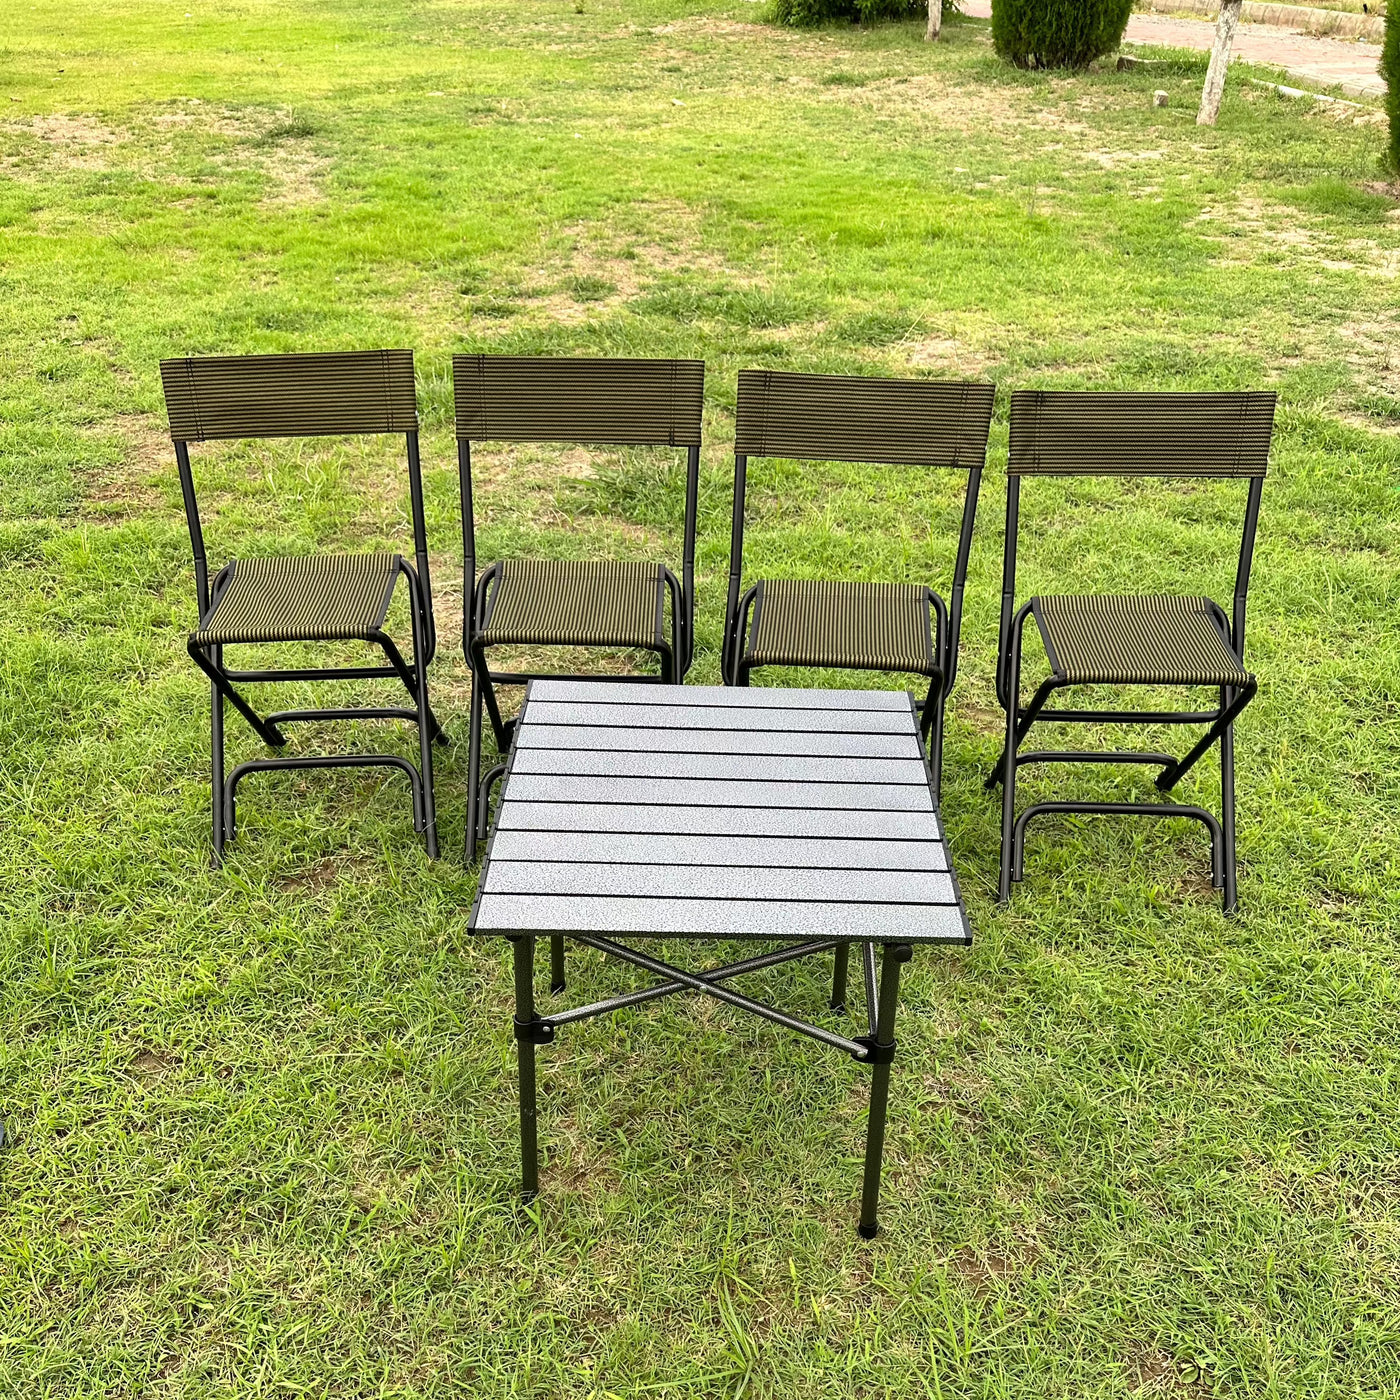 Camping Outdoor Aluminum Table With 4 Folding Stools